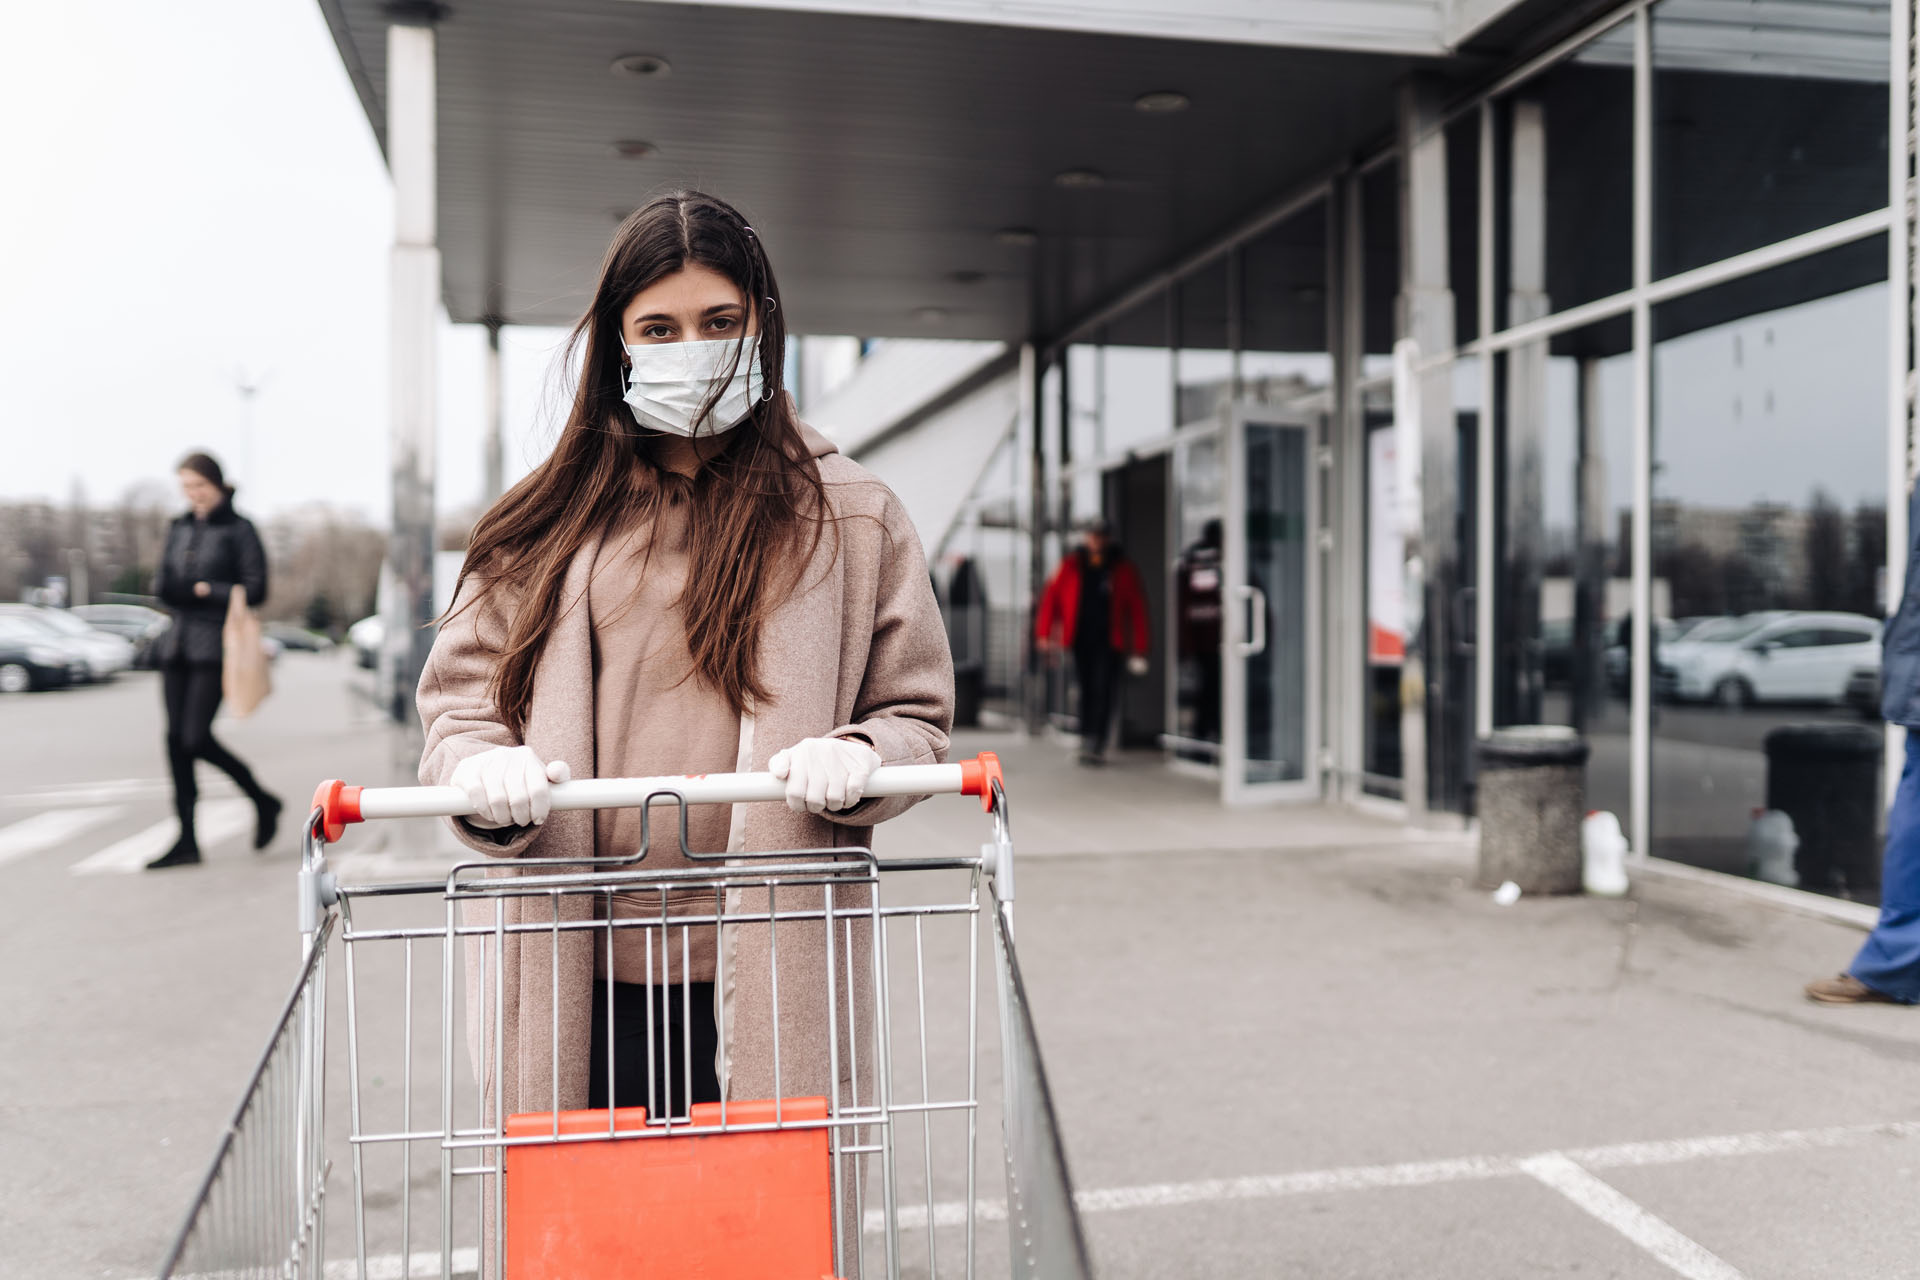 Young woman wearing protection face mask against coronavirus 2019-nCoV pushing a shopping cart.